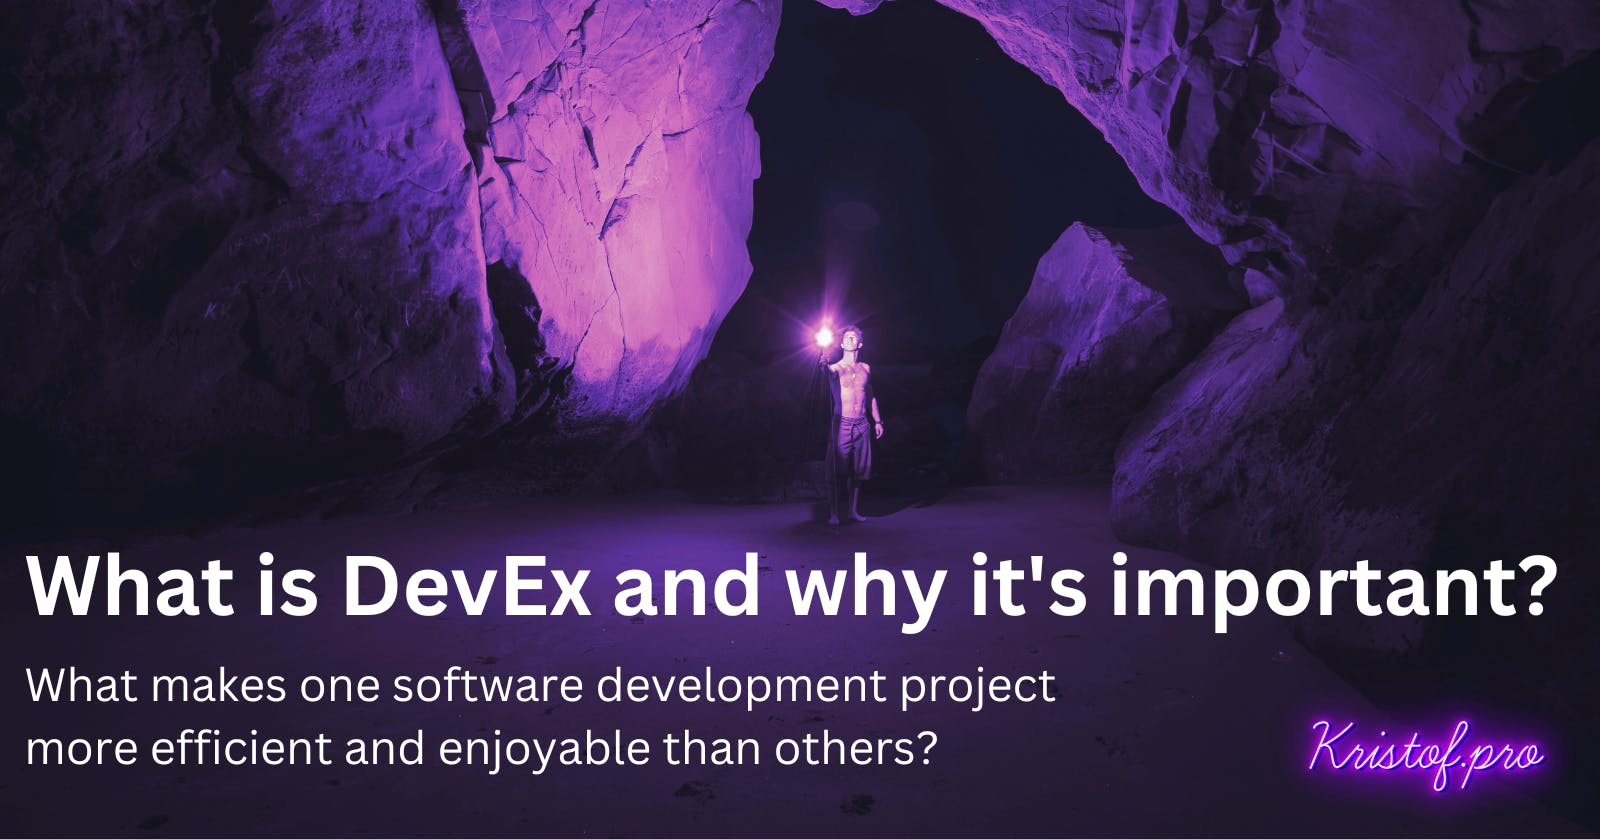 What is DevEx and why it's important?